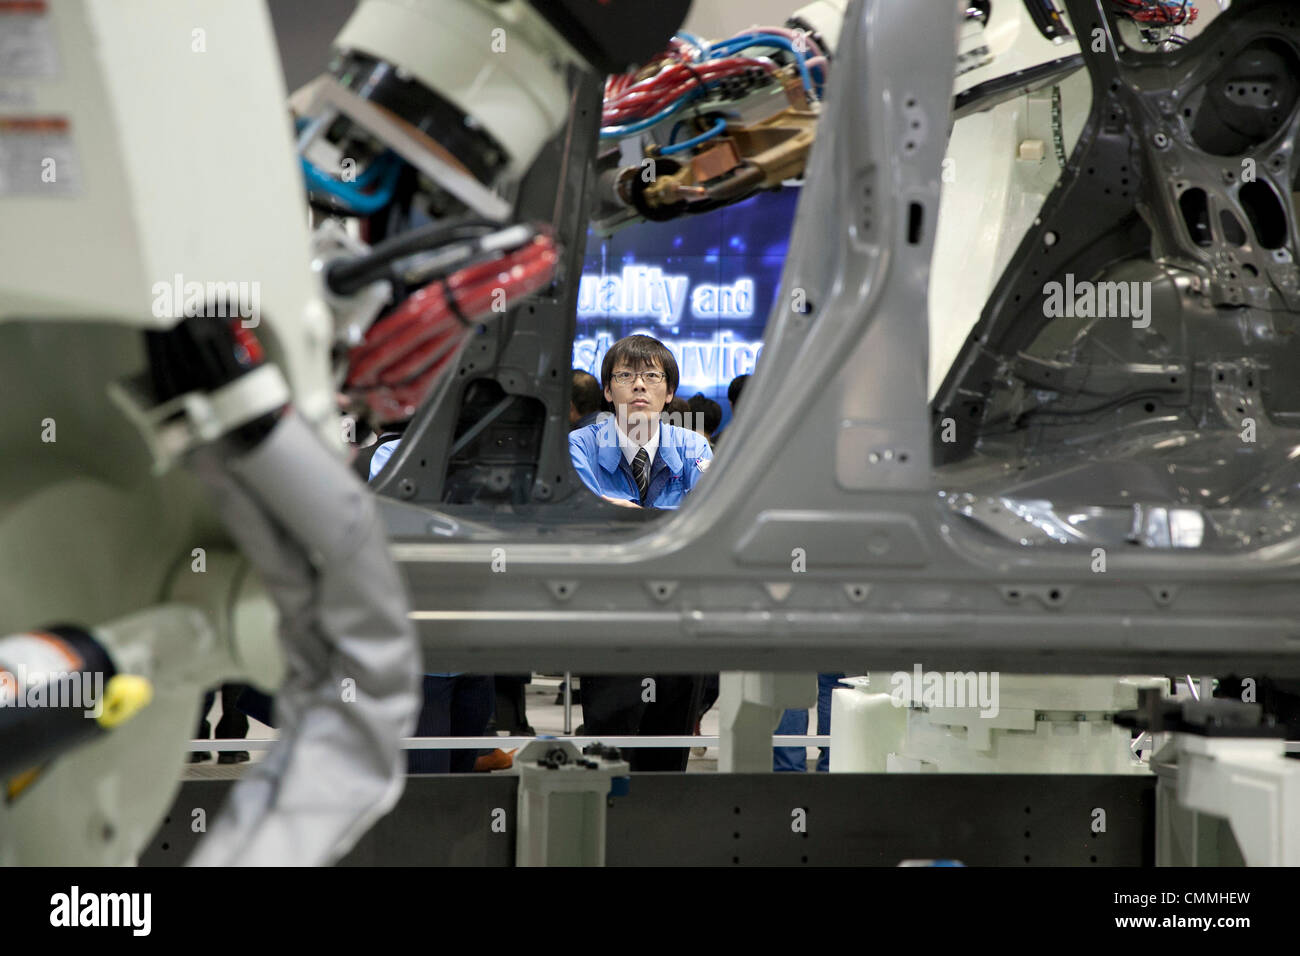 Tokyo, Japan. 6th Nov, 2013. A man sees the Kawazaki 'Body Assembly' system performance at the International Robot Exhibition 2013 in Tokyo, Japan, November 6, 2013. The IREX is the largest robot trade fair in the world and shows new robots and high technology equipments at theTokyo International Big Sight. The exhibitions runs from November 6 to 9. © Rodrigo Reyes Marin/AFLO/Alamy Live News Stock Photo